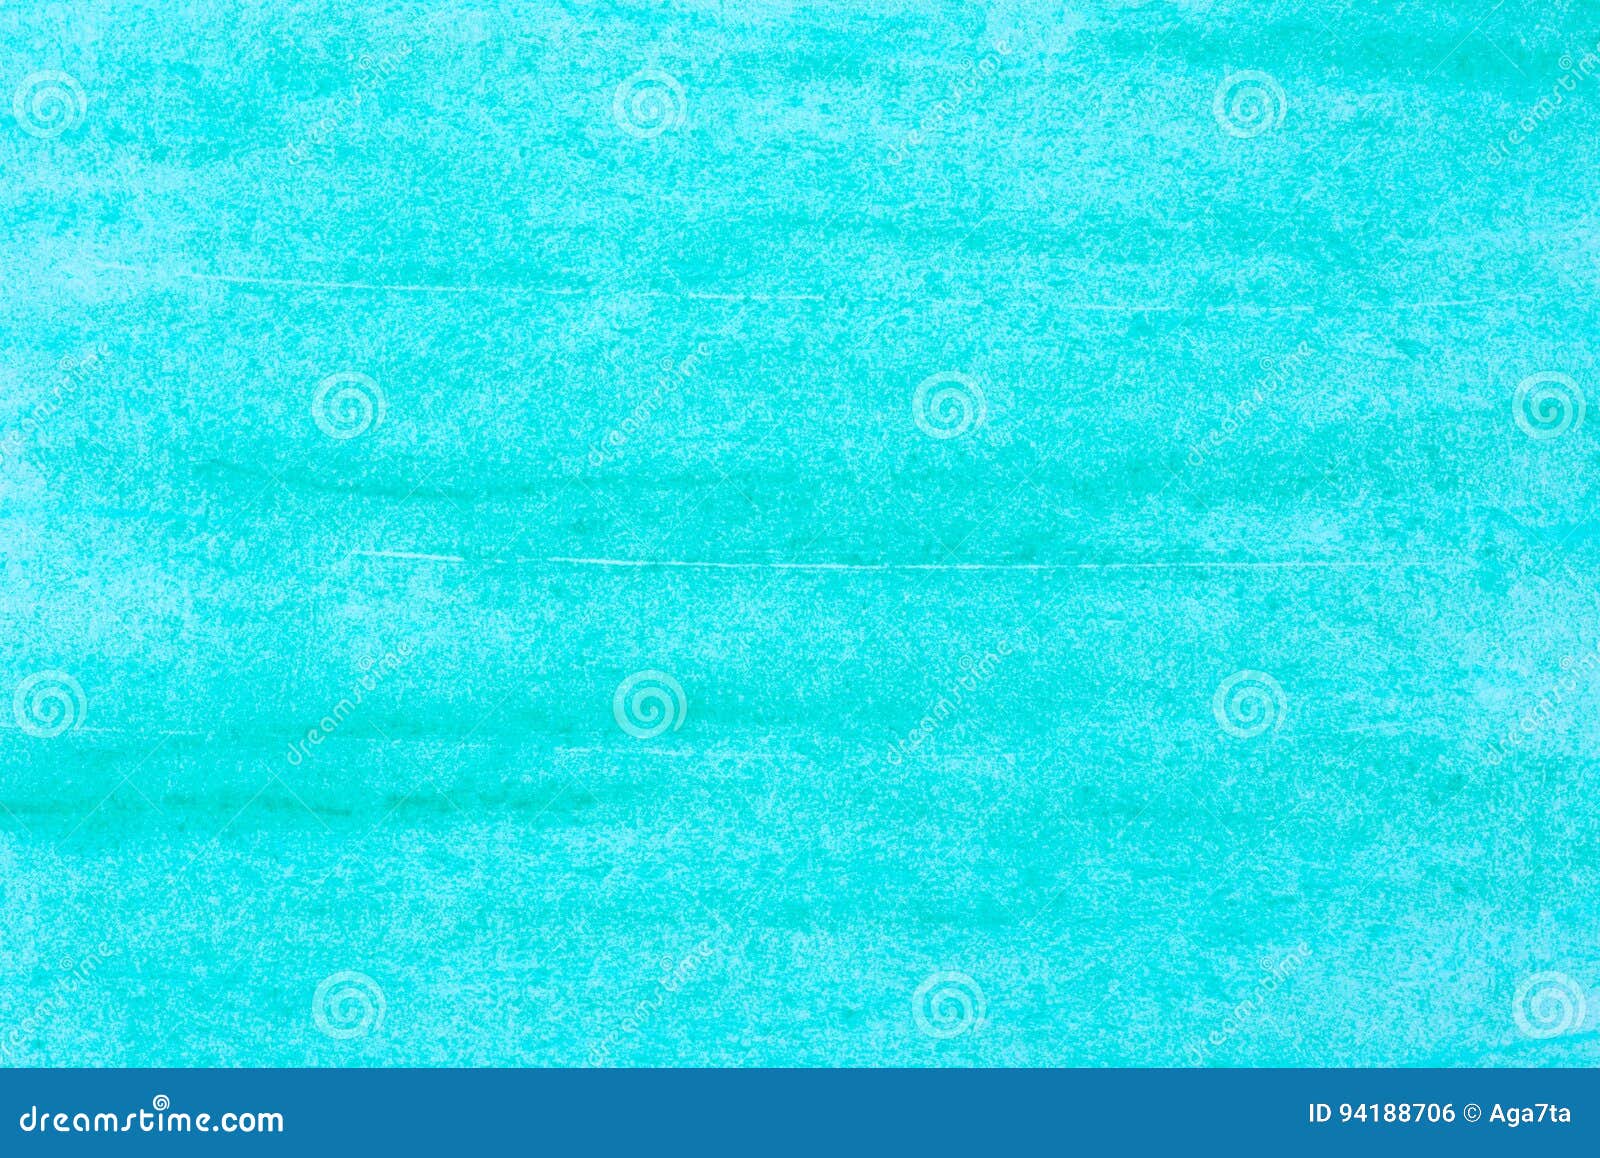 Turquoise Art Pastel Background Texture Stock Photo - Image of macro, color:  94188706